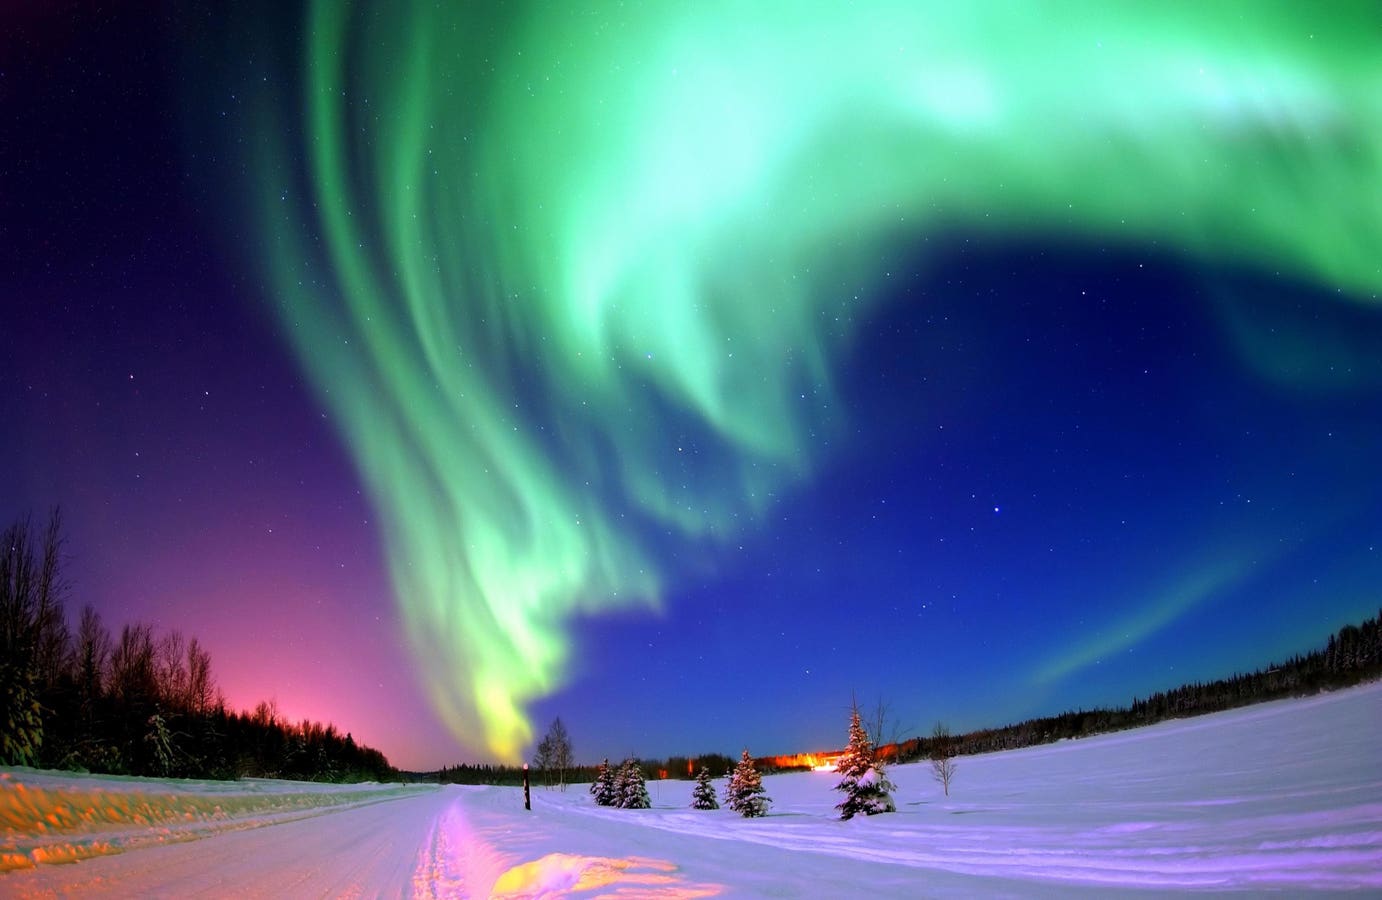 Northern Lights Alert: Here’s Where You Could See The Aurora Borealis Tonight